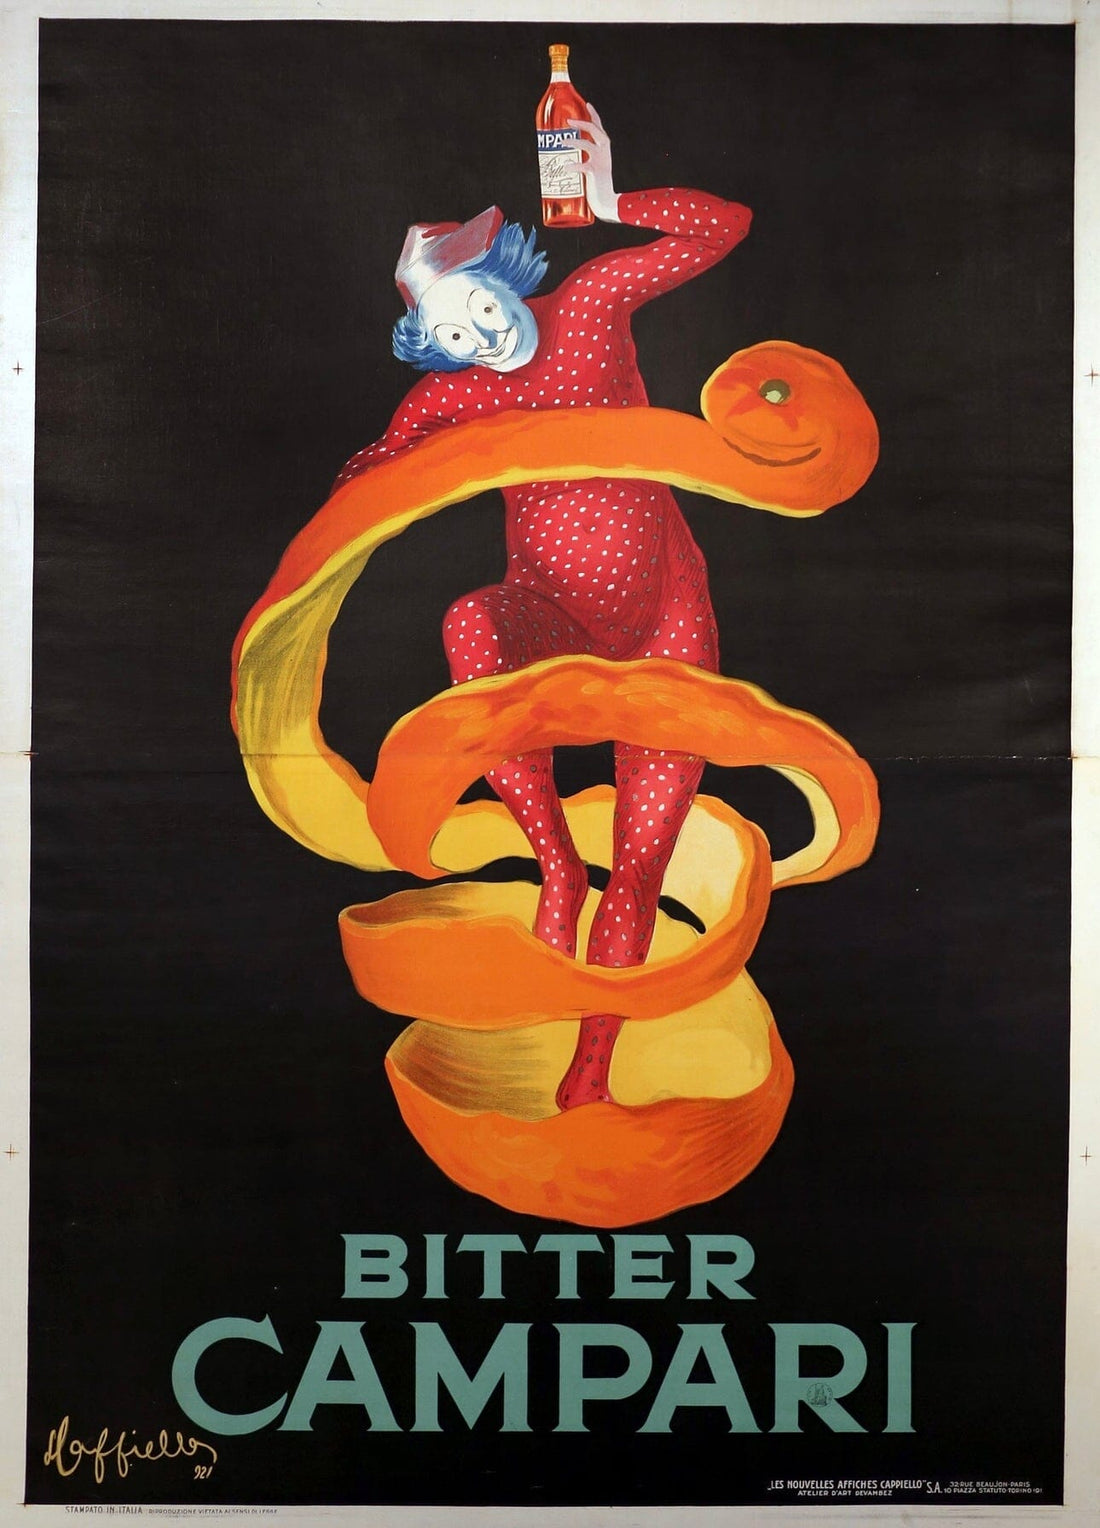 Who was the first poster designer?